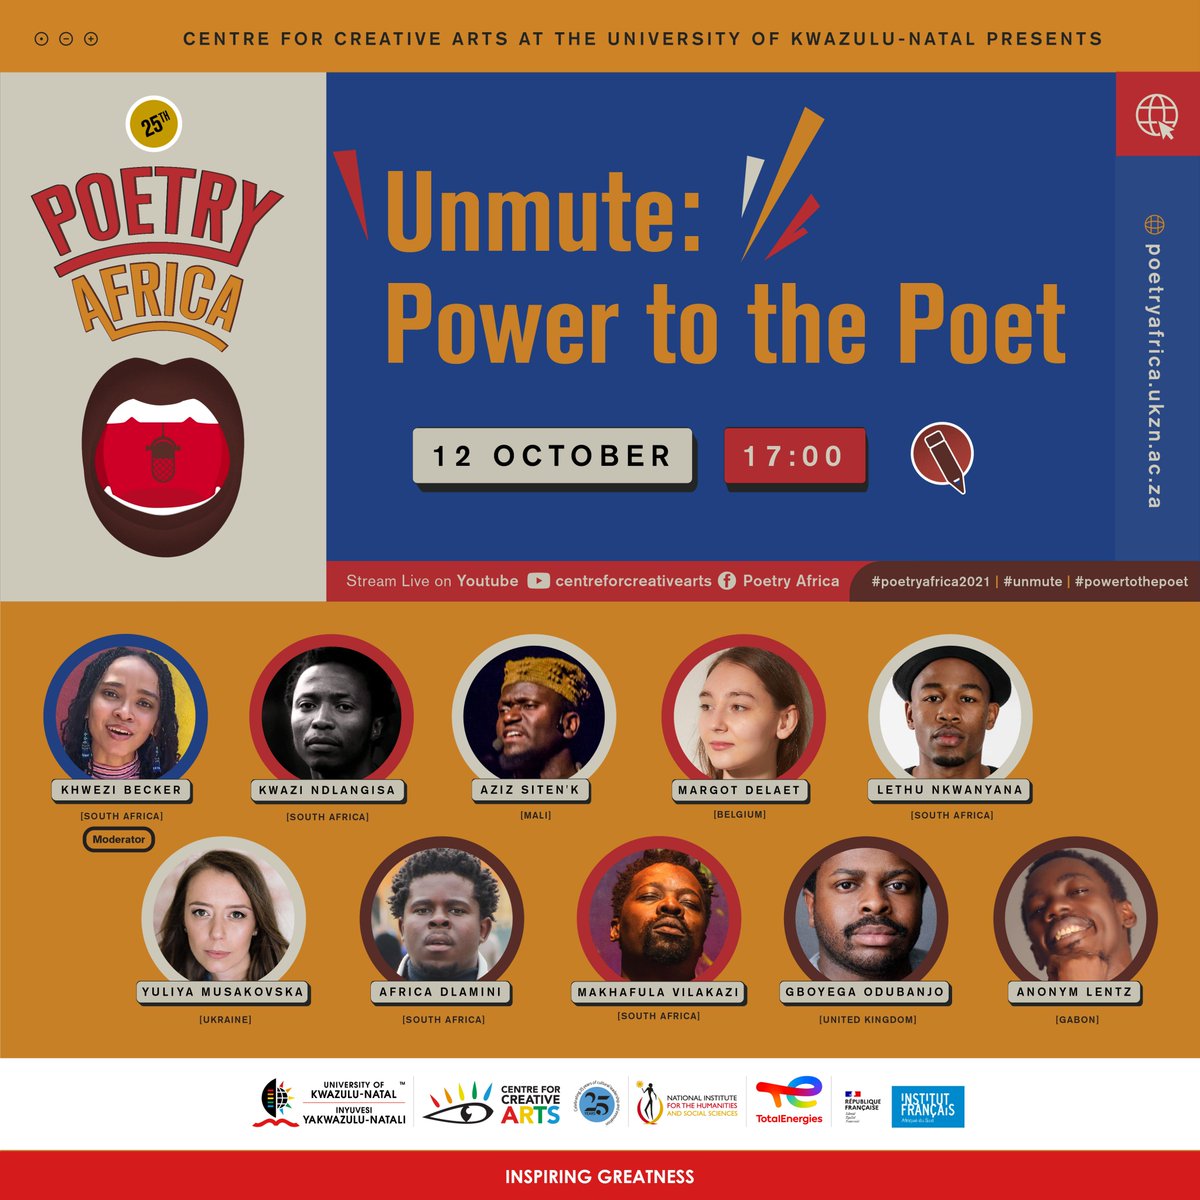 We are live right now! #Powertothepoet 

Tune in to our Facebook page 
#PoetryAfrica2021